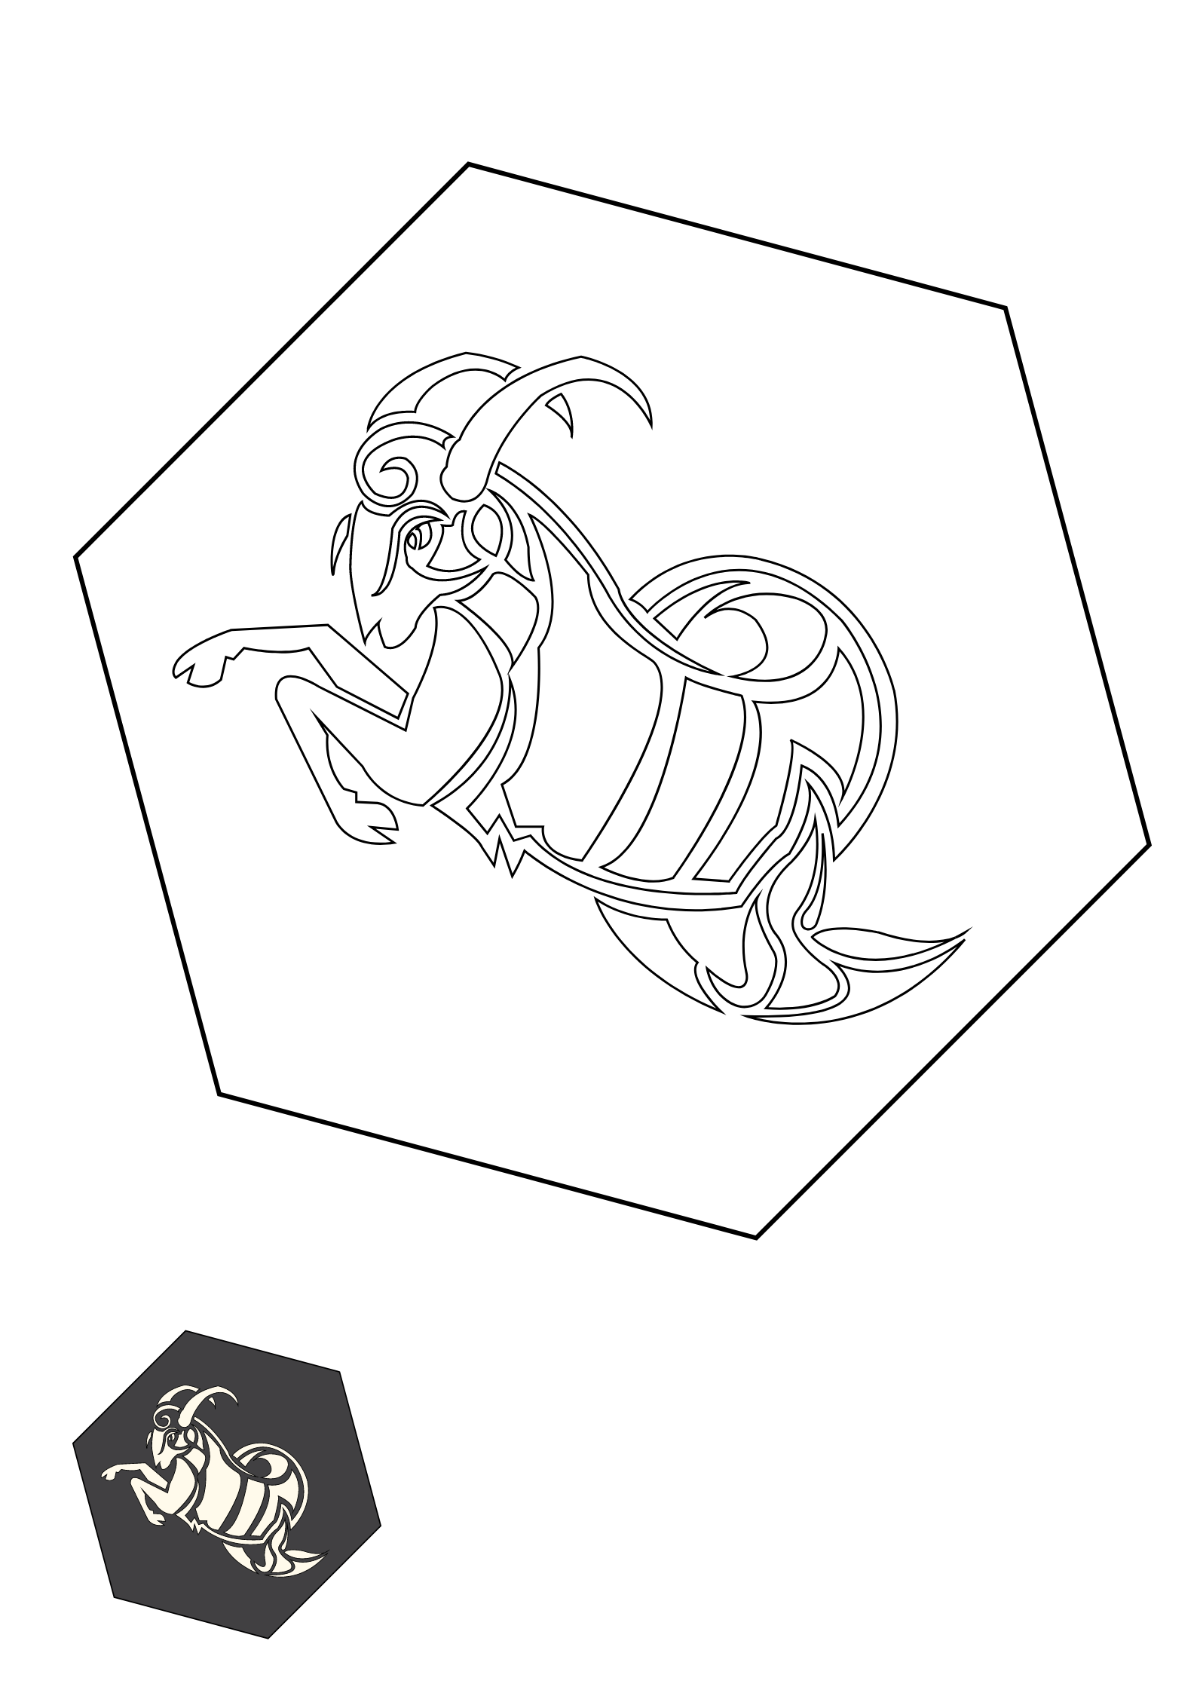 Tribal Capricorn coloring page